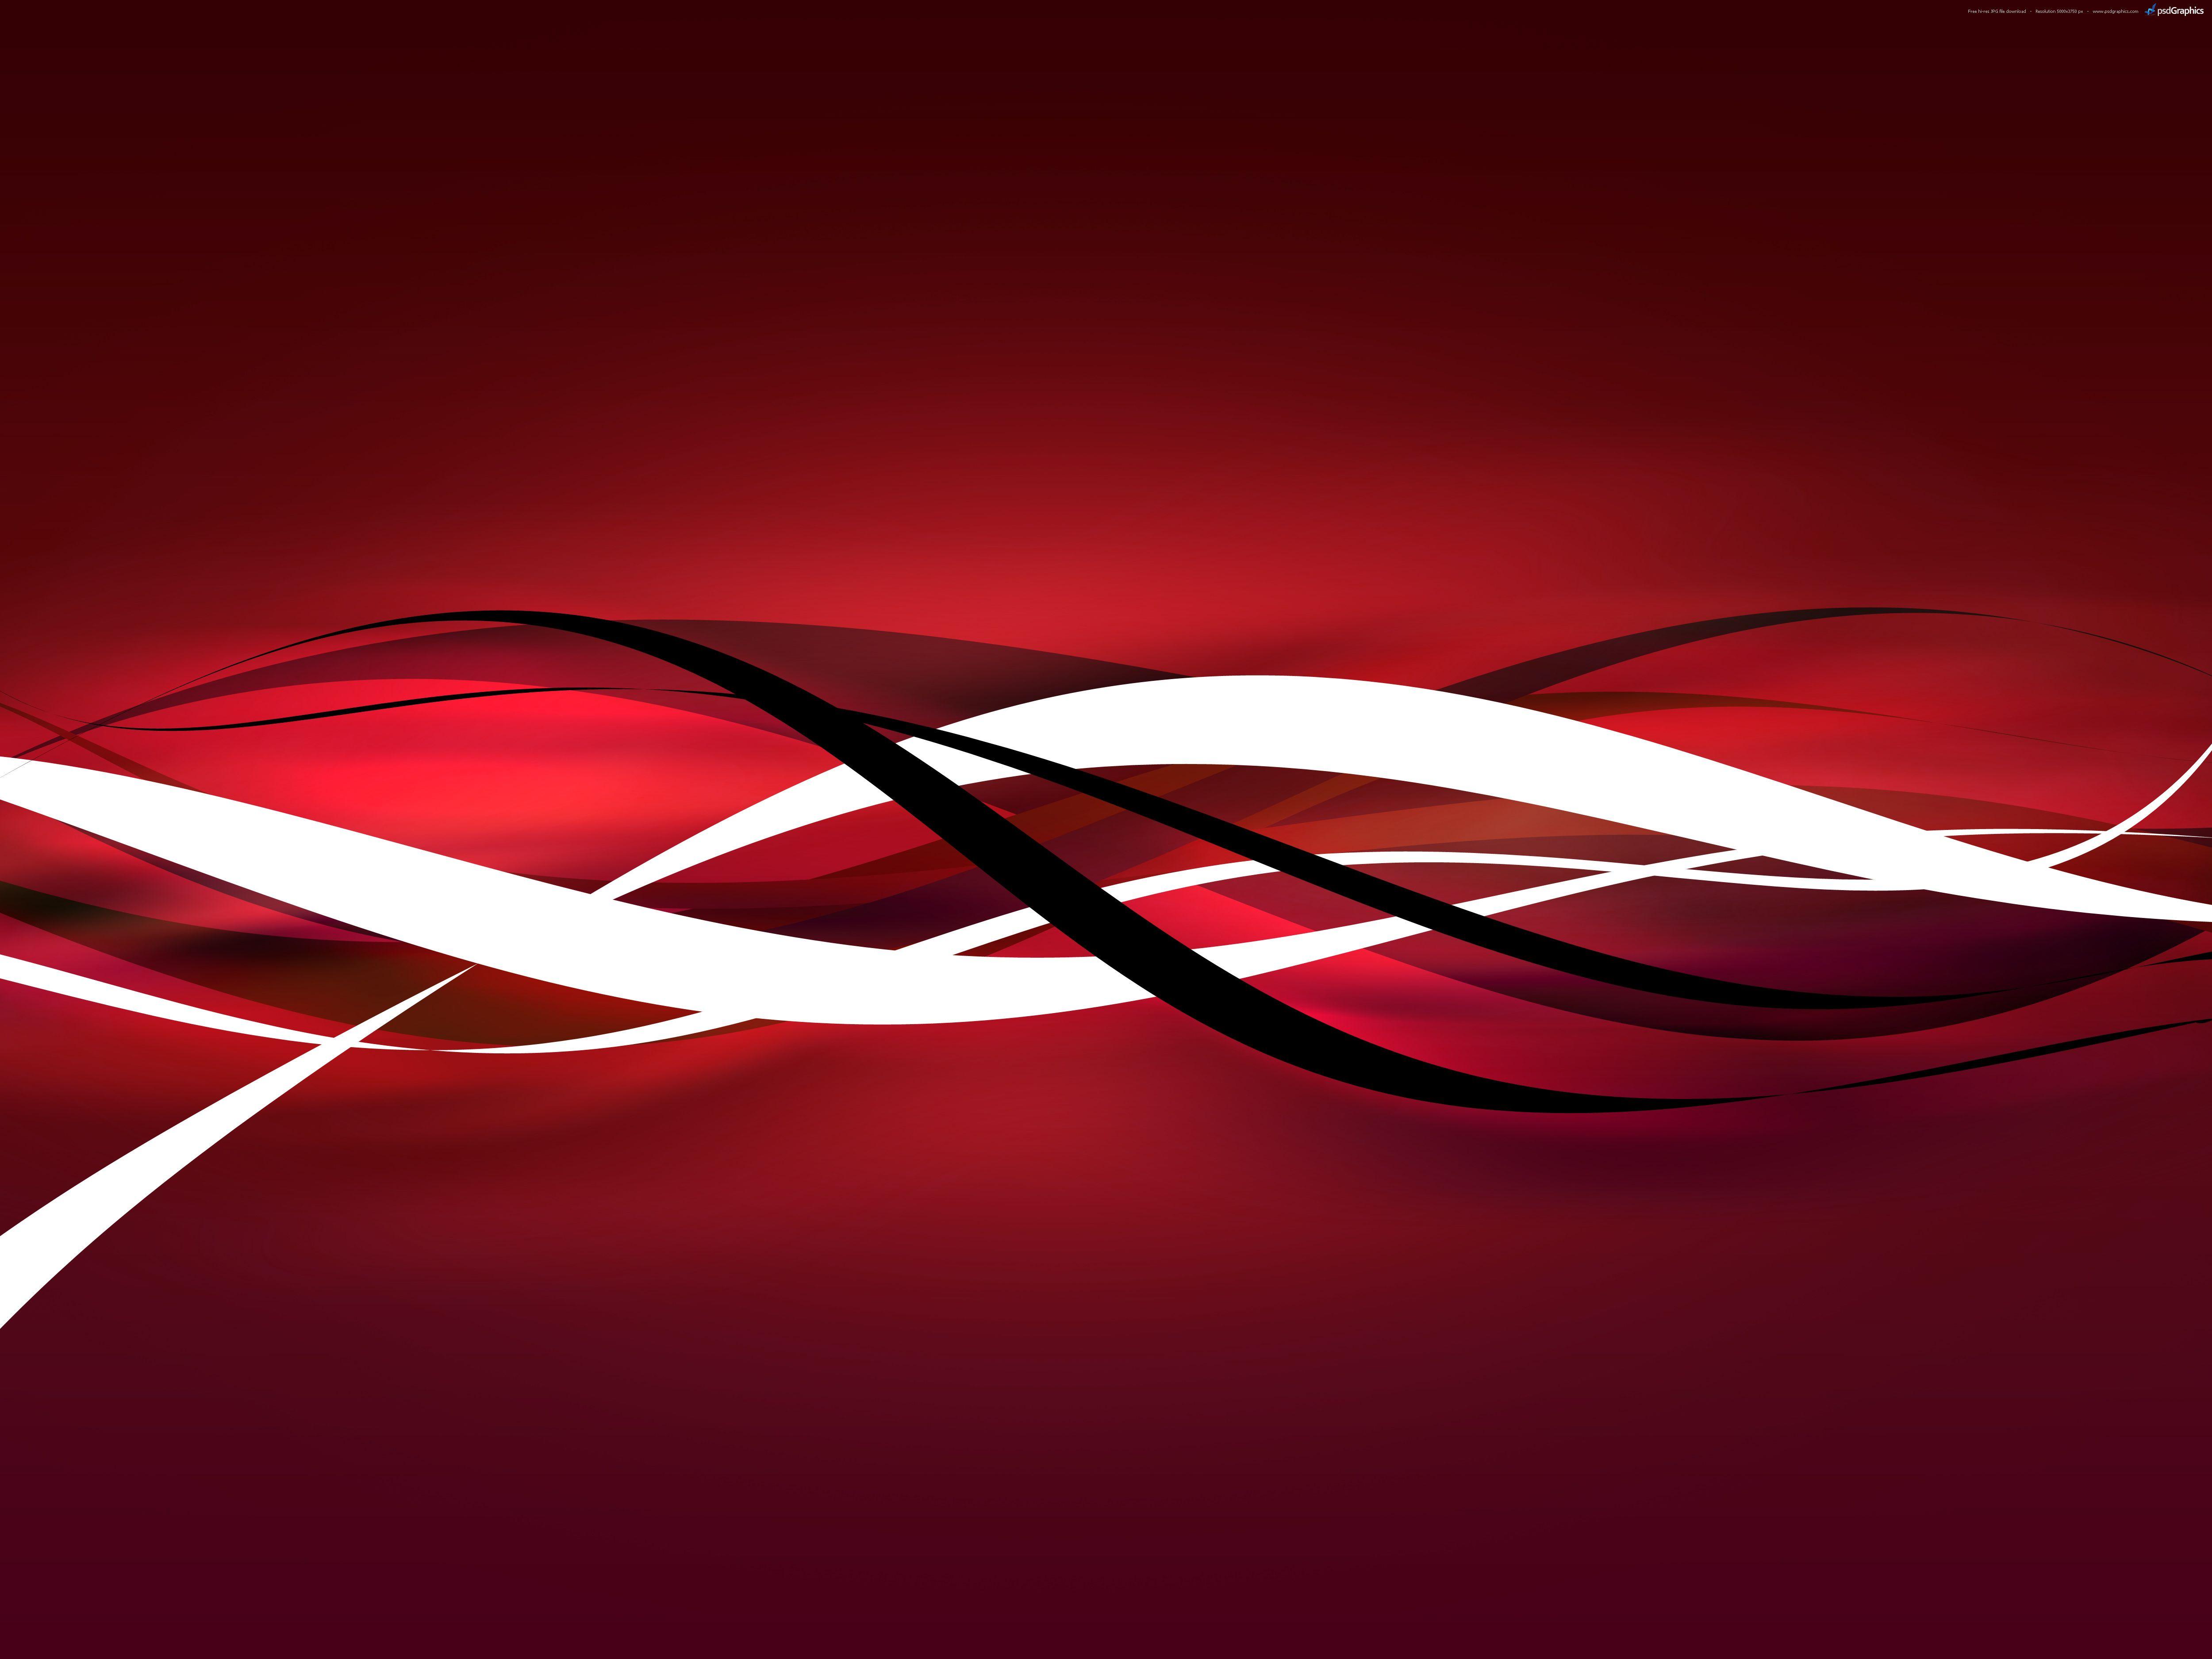 Red White and Black Abstract Wallpapers - Top Free Red White and Black